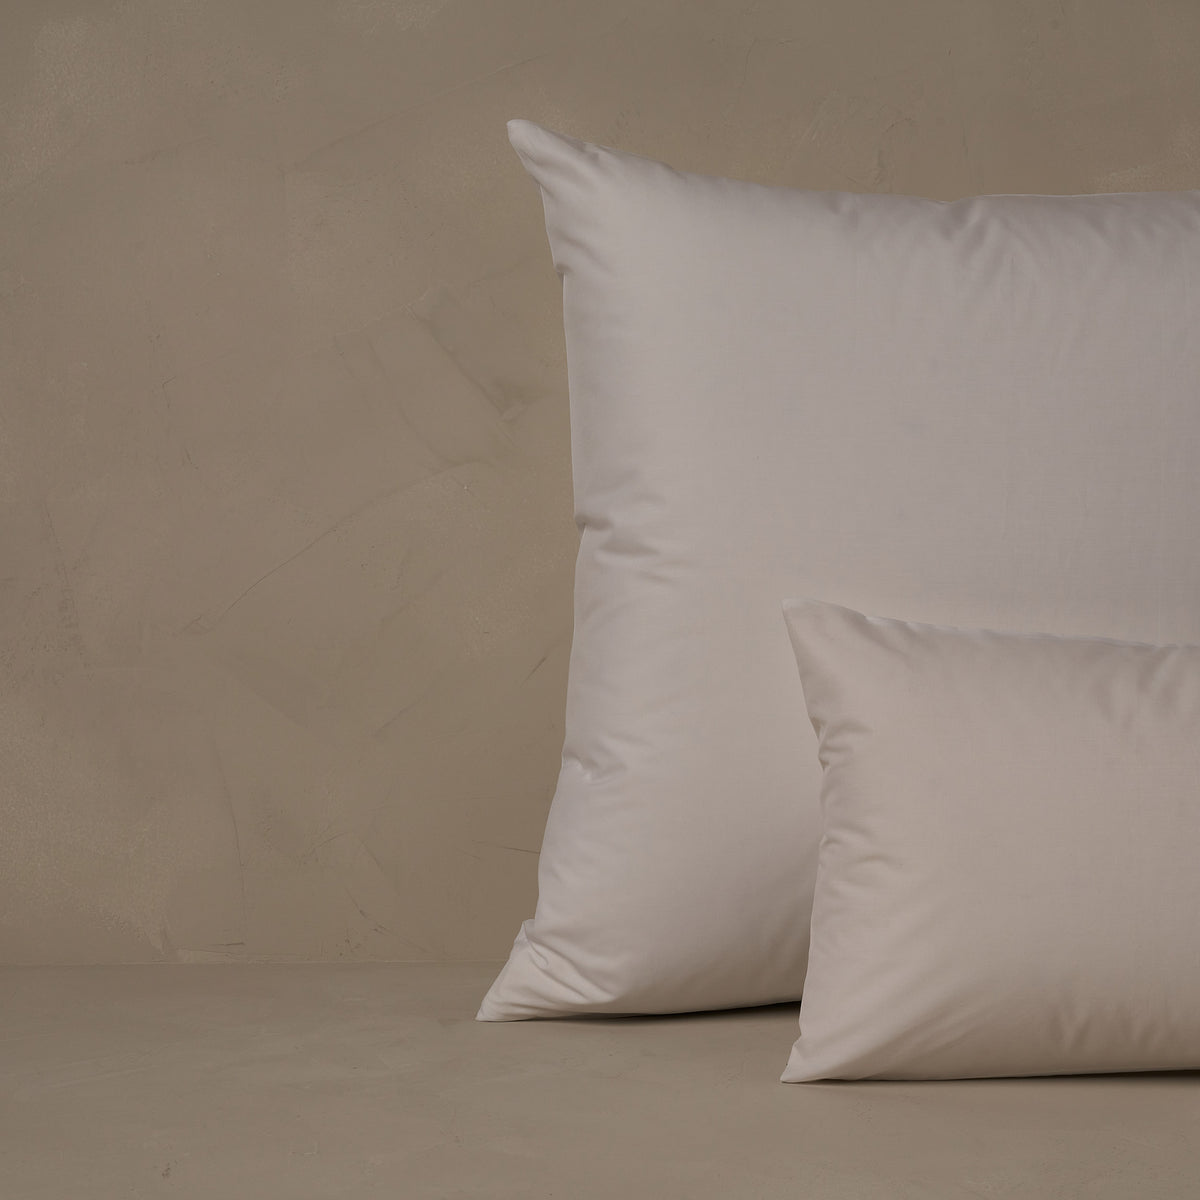 An image of a small boudoir or travel size pillow stacked in front of a large euro size pillow. The pillow cases are made of LETTO's crisp and cool Classic Cotton Percale in color white. data-image-id=